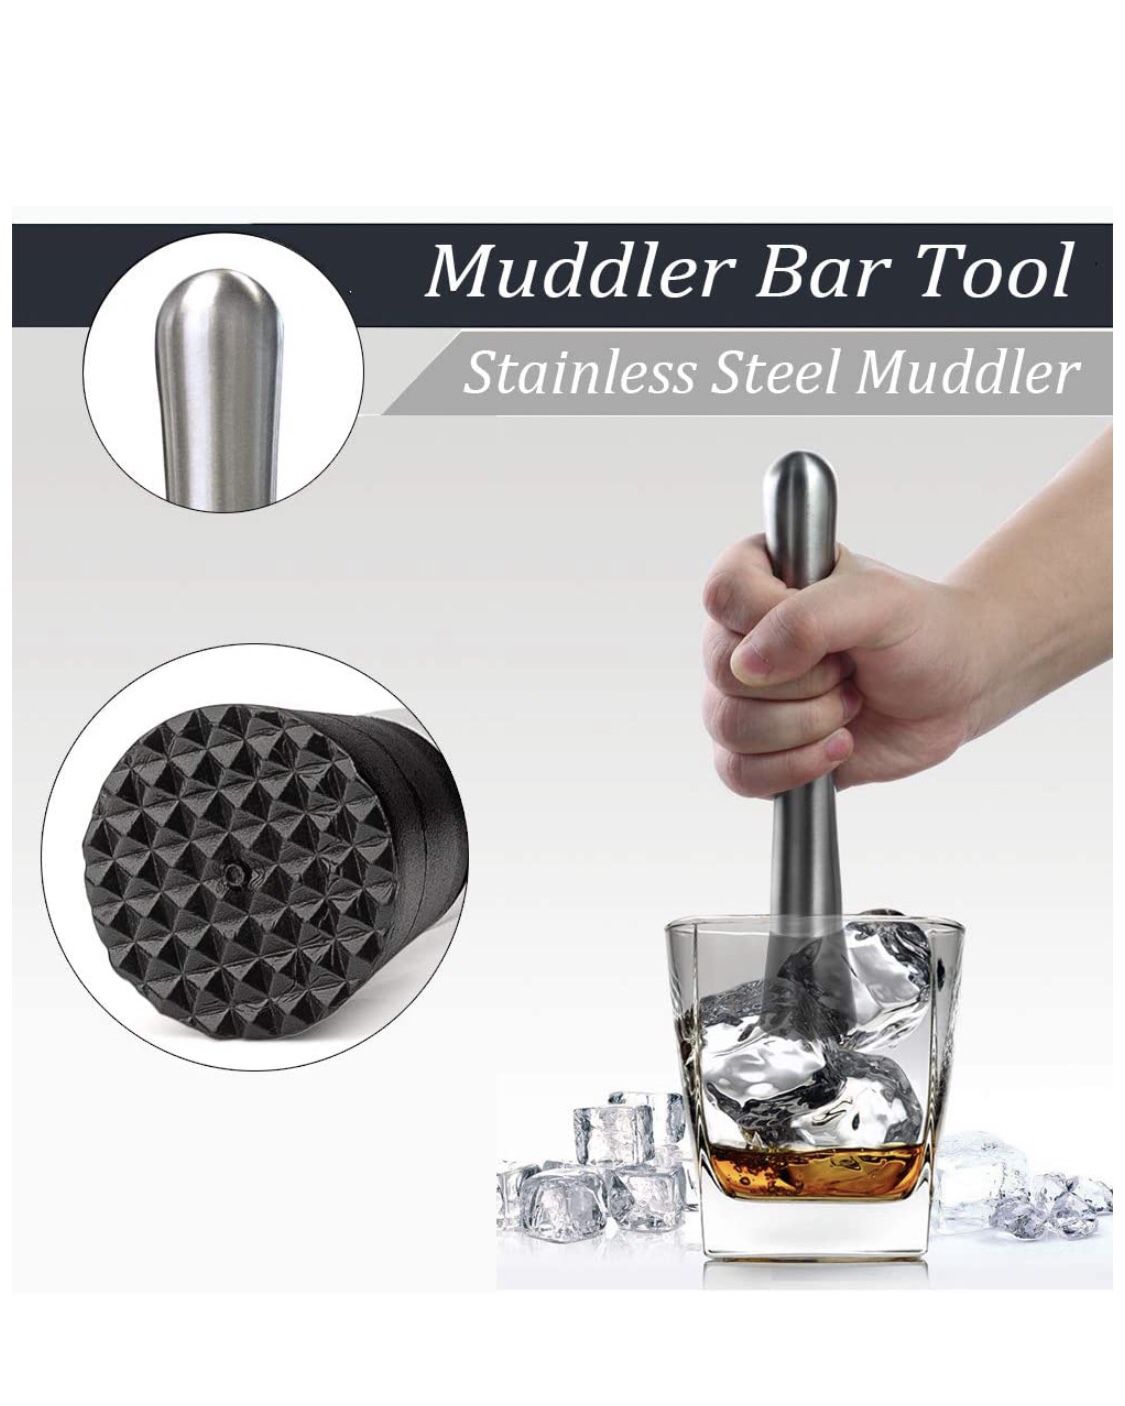 Brand new! Cocktail Mixing Glass Kit, 9 Piece Home Bar Set - Drink Mixer with 18oz 500ml Lead-Free Glass, Cocktail Strainer, Muddler, Jigger, Profess